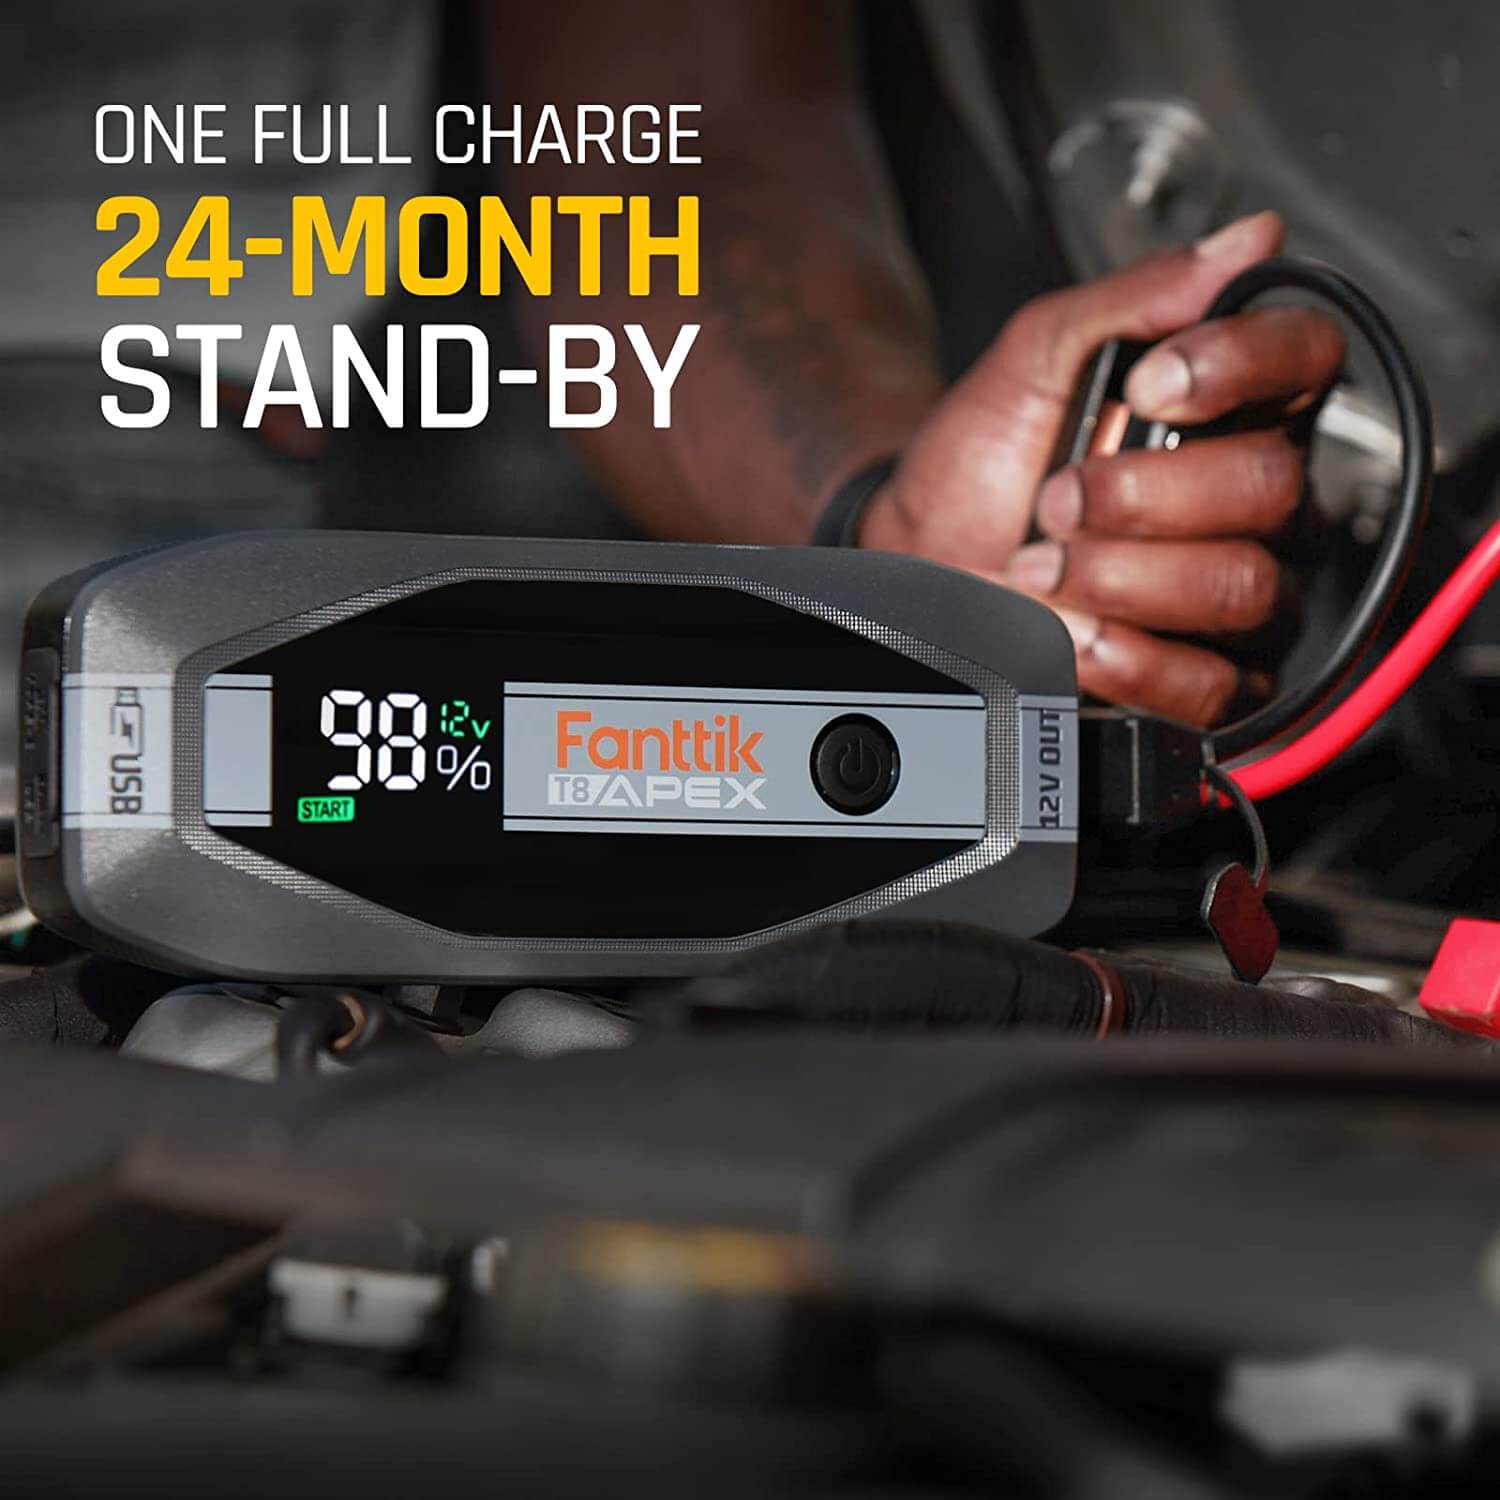 One full charge 24-month protable jump starter